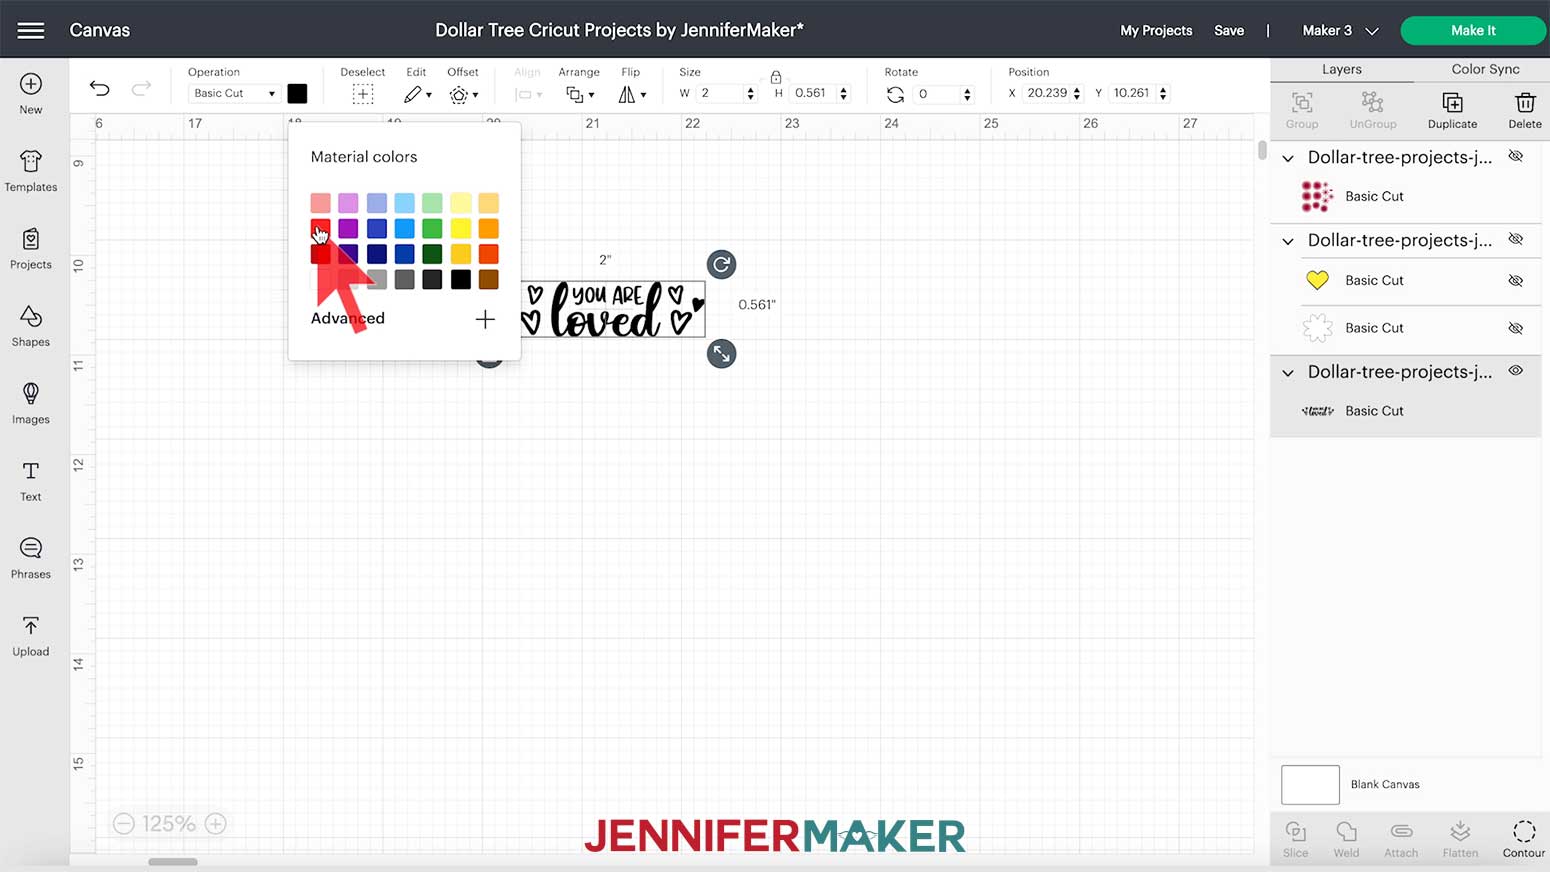 The Cricut Design Space canvas showing the dropdown color menu showing how to change the layer color.